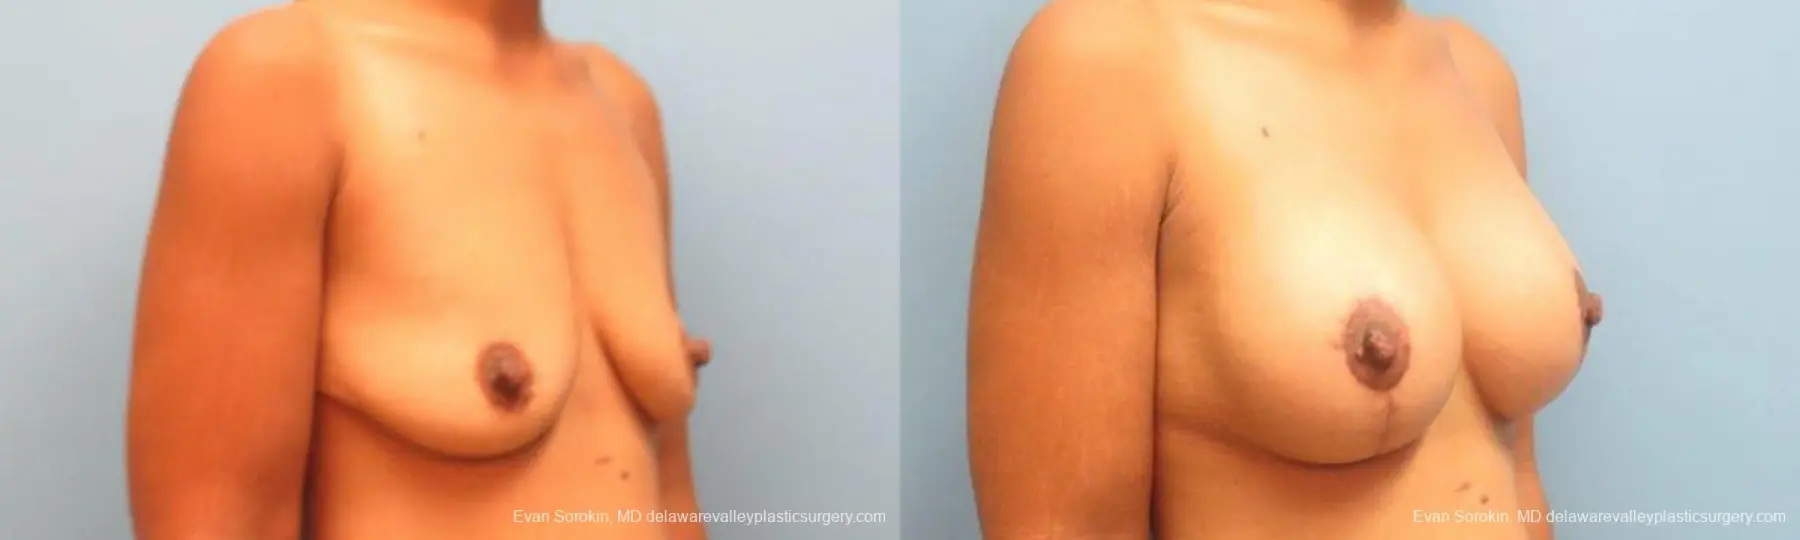 Philadelphia Breast Lift and Augmentation 9343 - Before and After 2